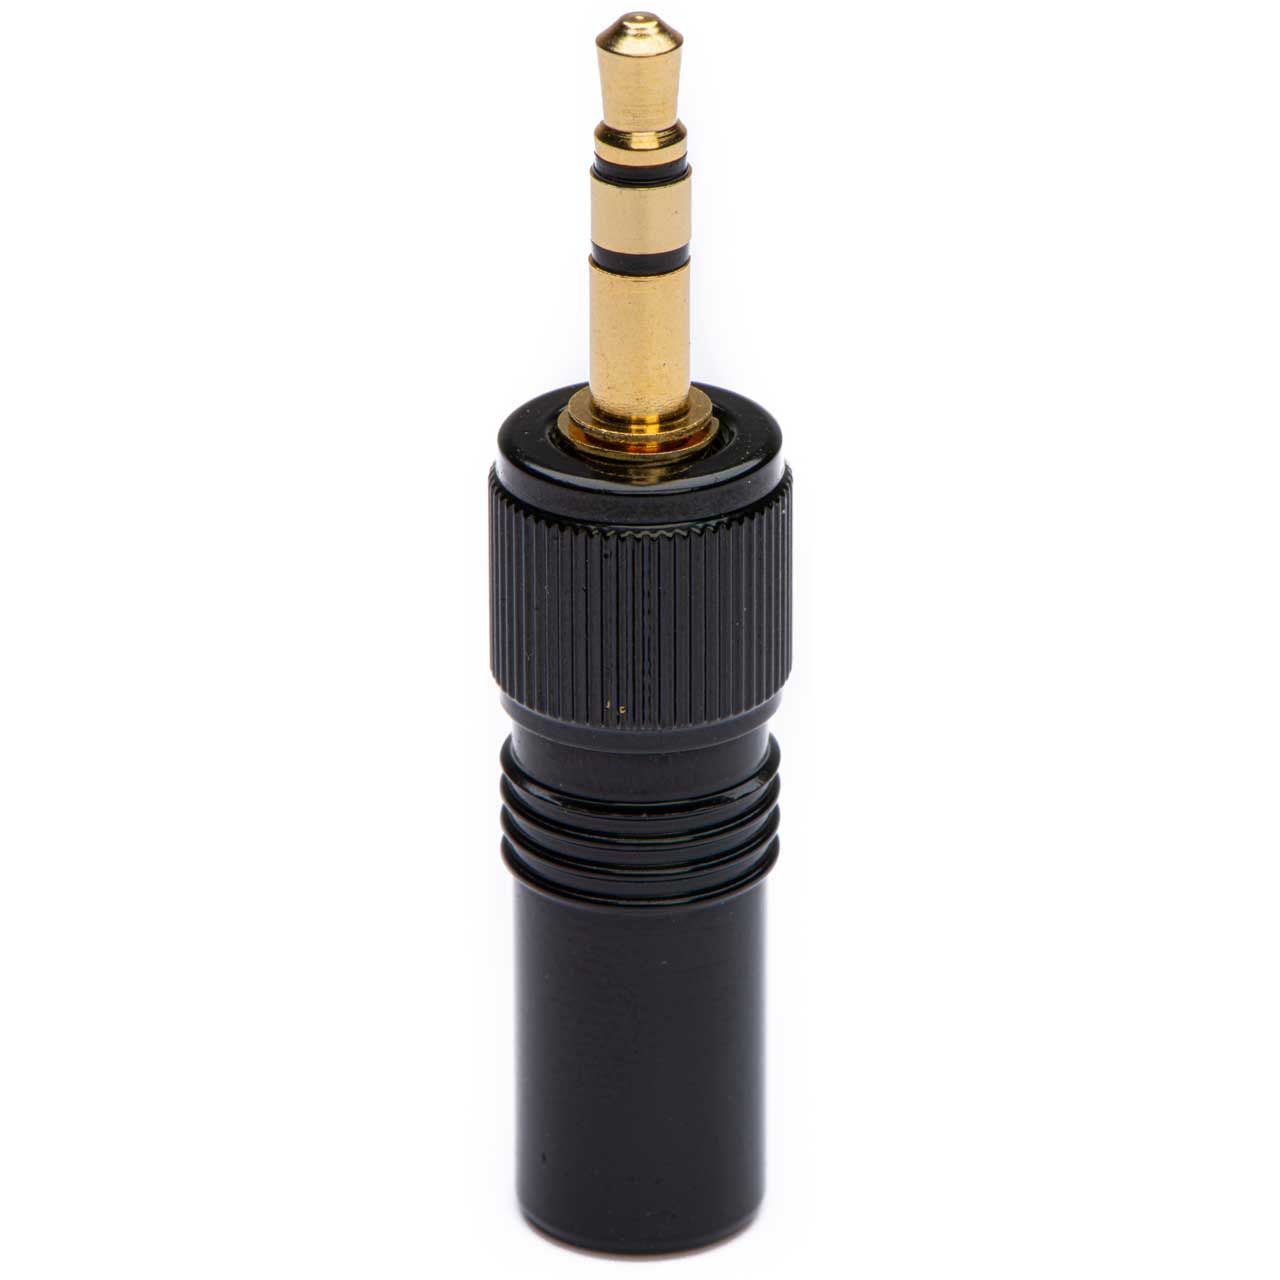 M-3.5S LOCKING 3.5mm Male TRS Stereo Audio Plug - Cable End Connector - Black